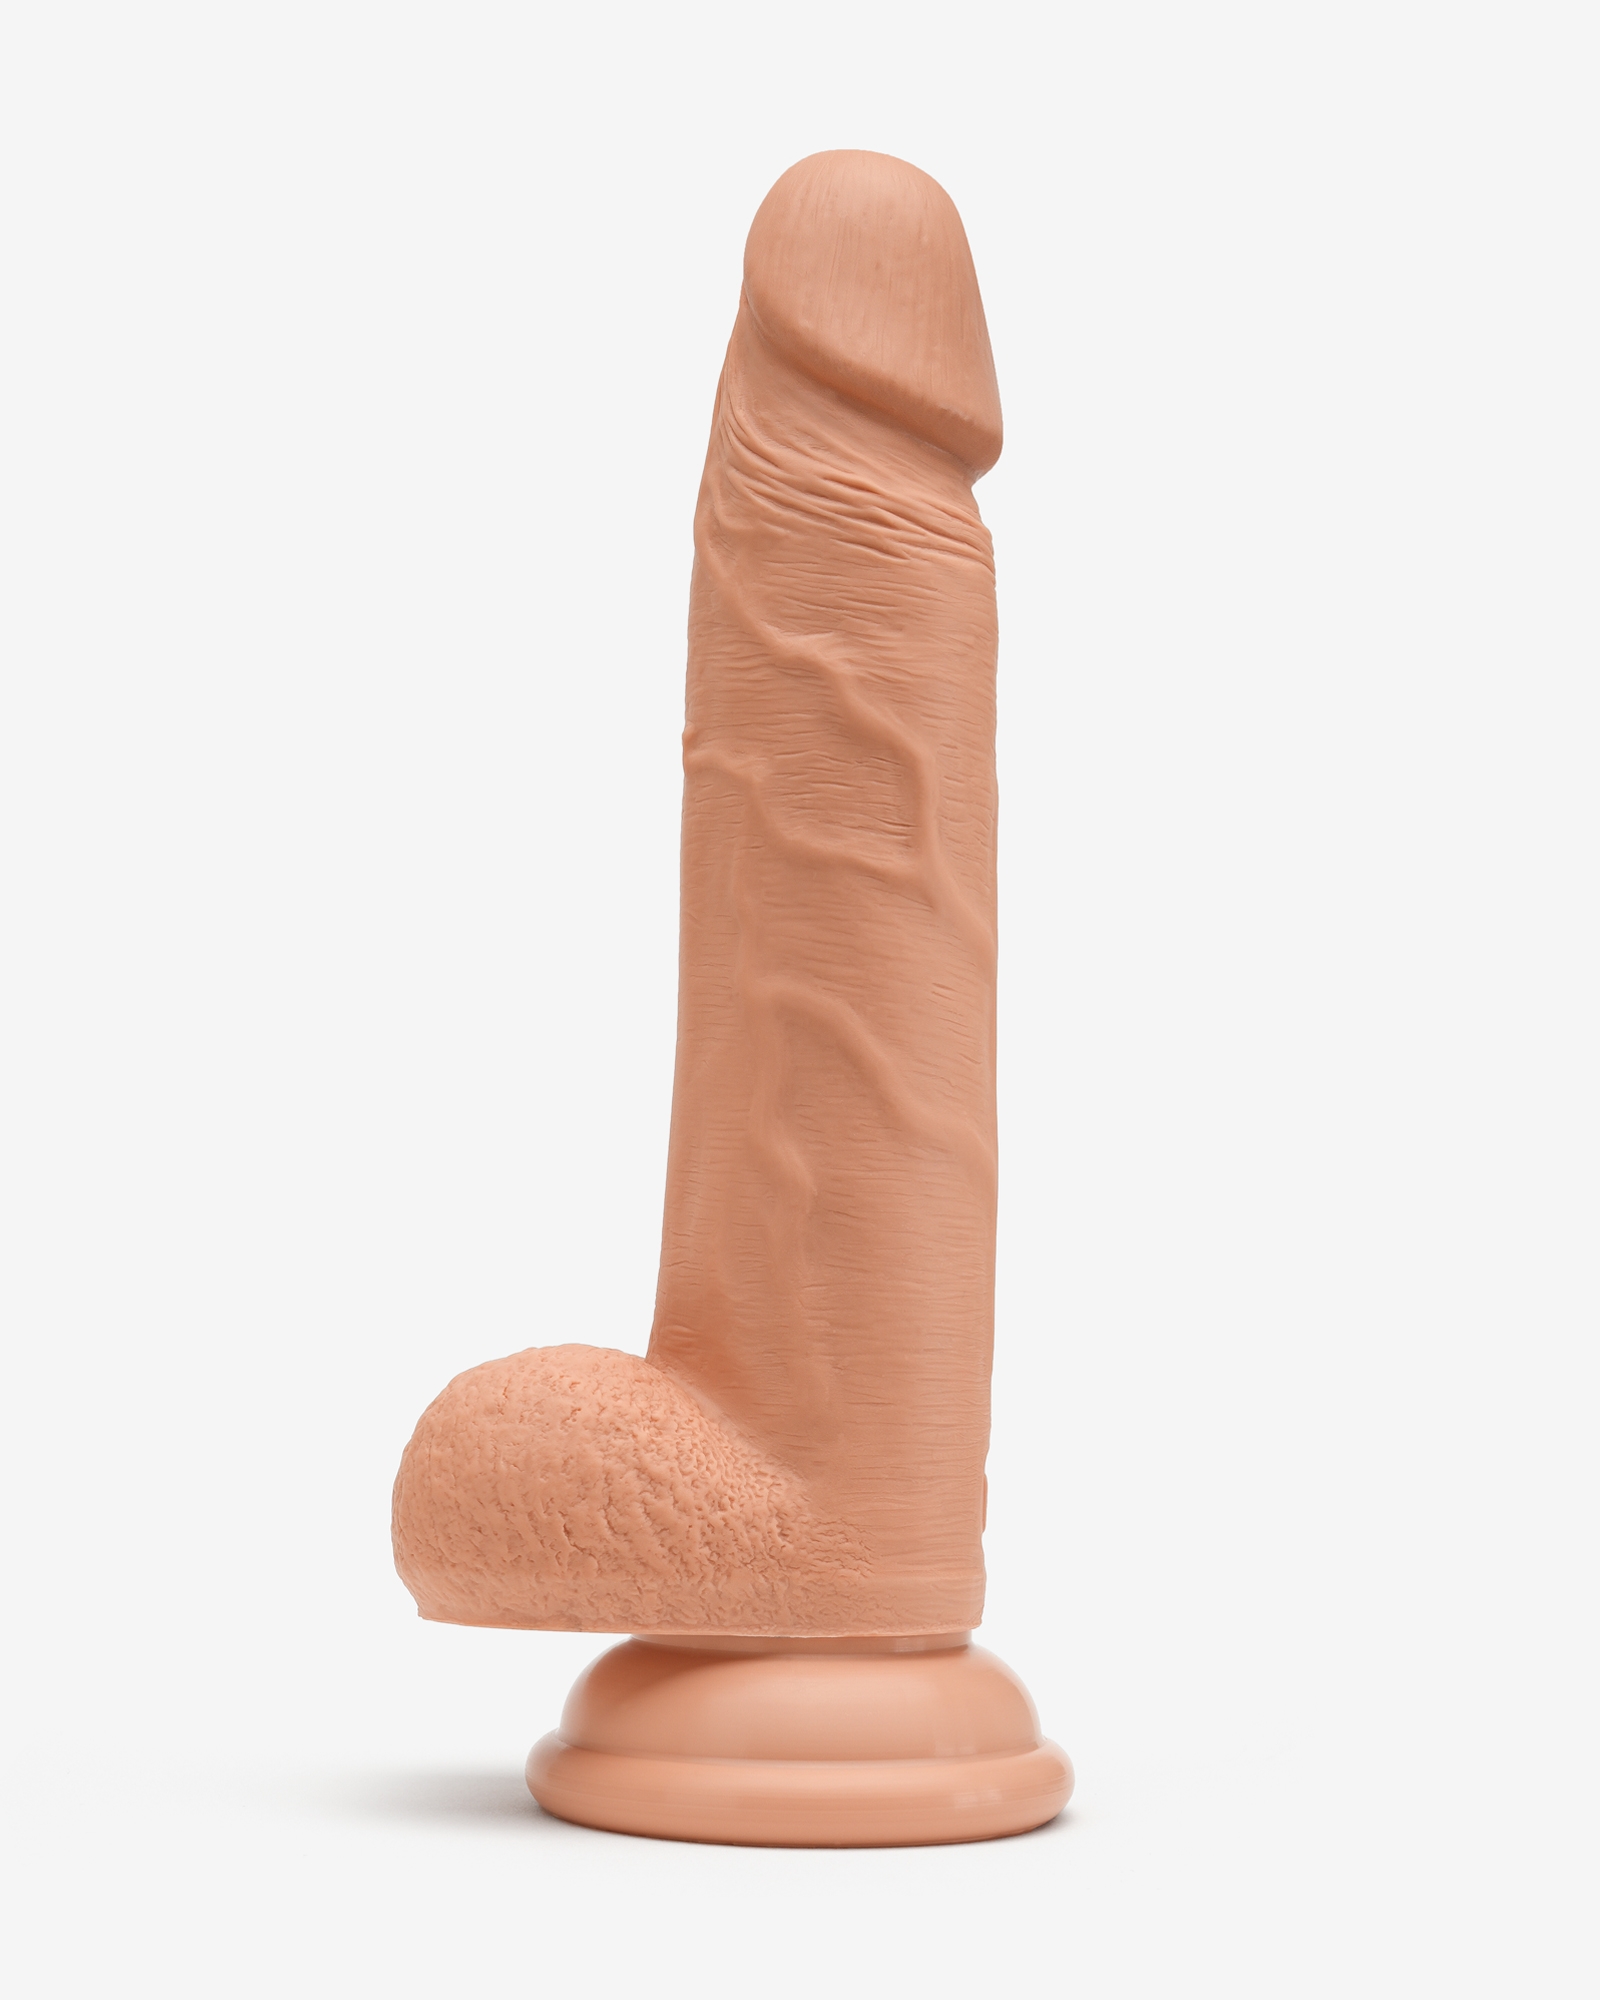 6 Inch Realistic Dildo with Suction Cup and Balls, Silicone Material, Dual Density, Tan - Left